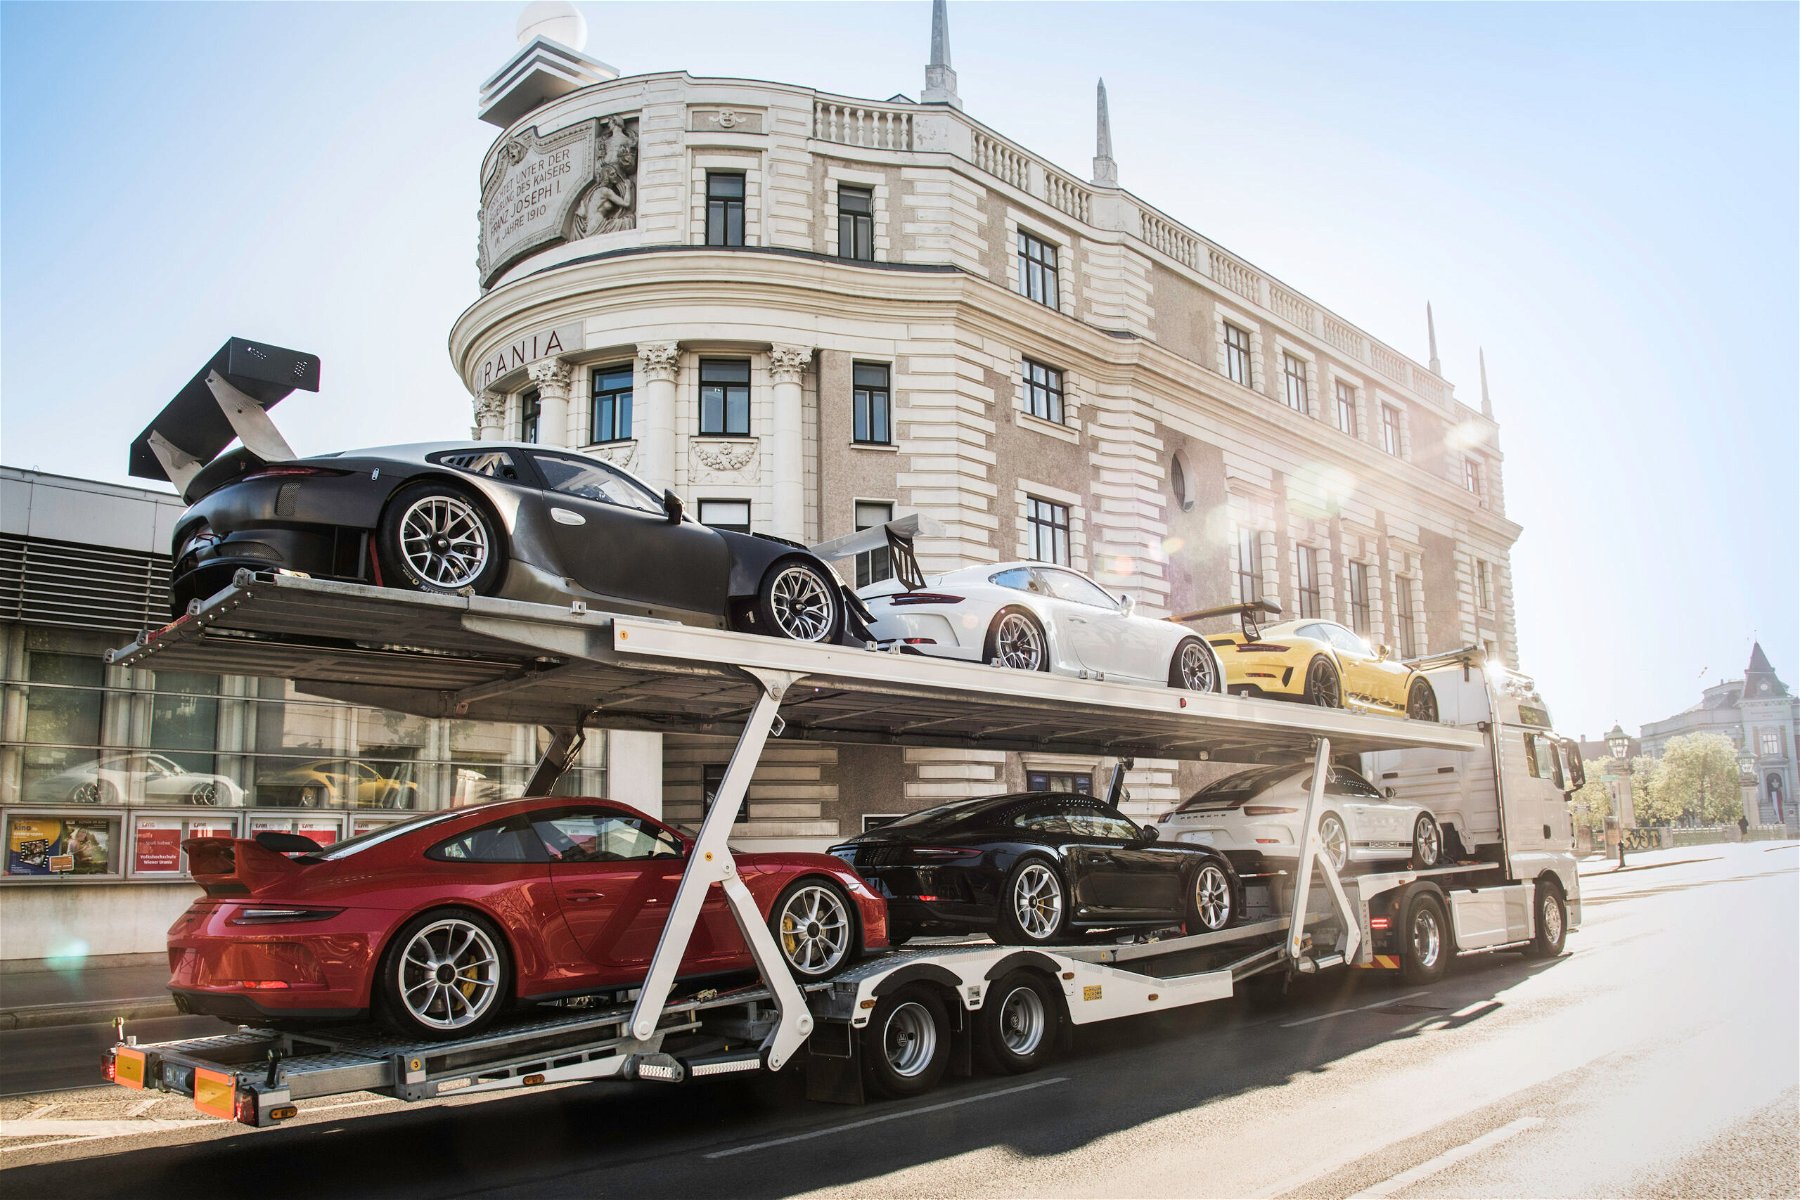 Toys for Boys collection offers Porsche 991 perfection